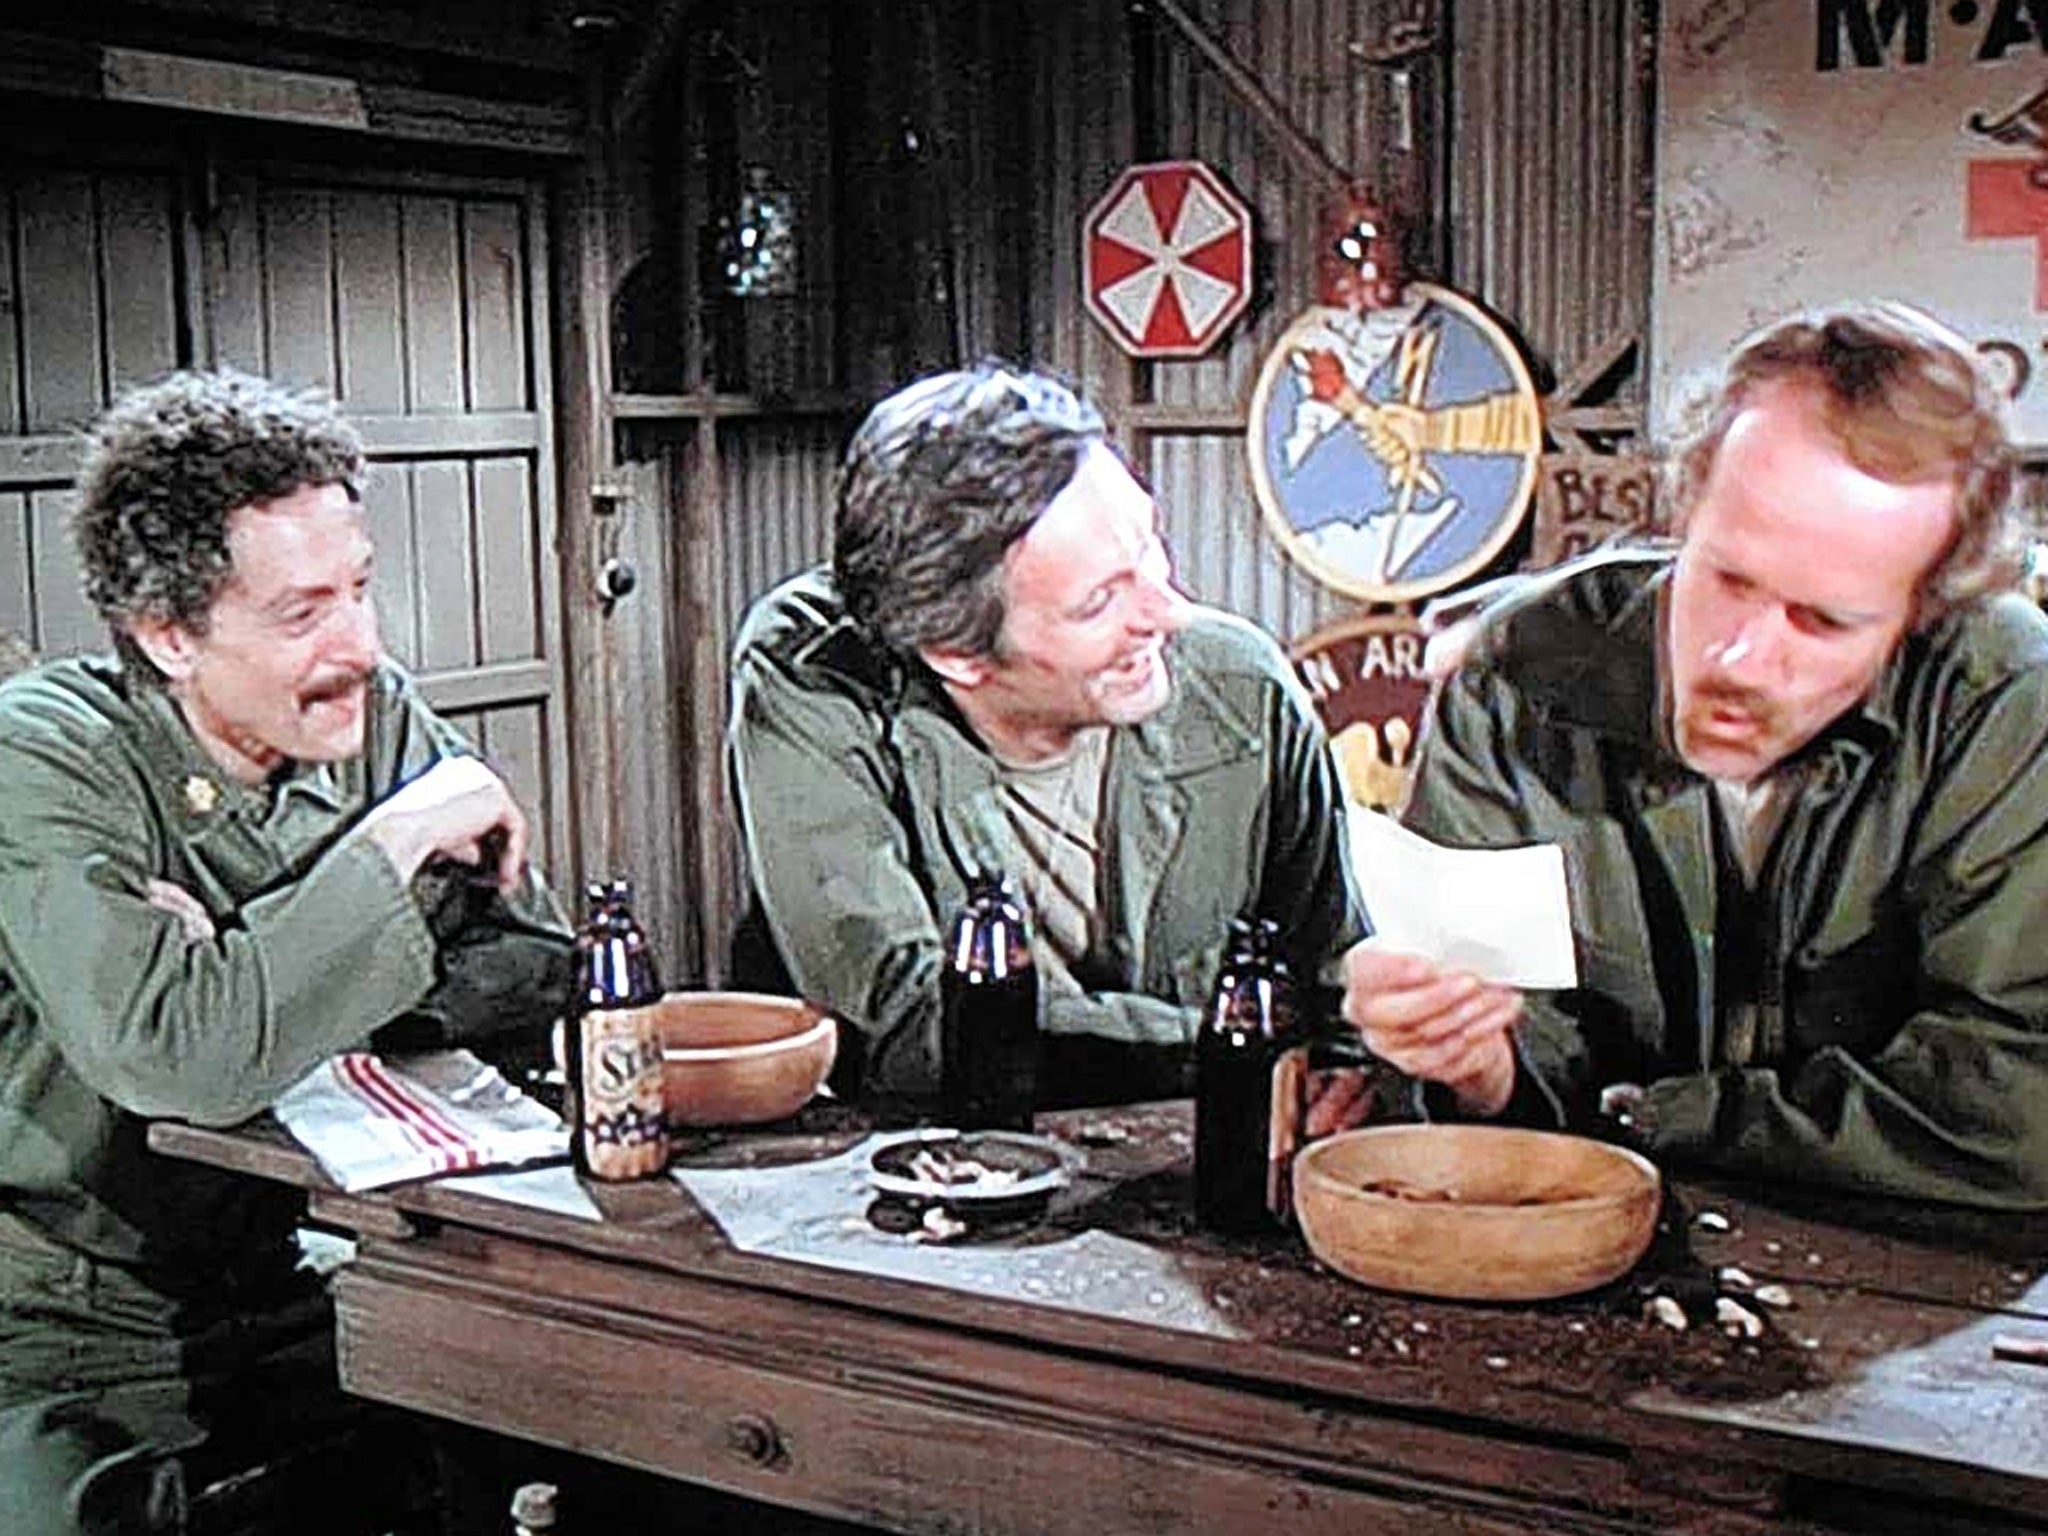 Arbus, left, with Alan Alda as Hawkeye and Mike Farrell as BJ Hunnicutt in an episode of 'M*A*S*H'